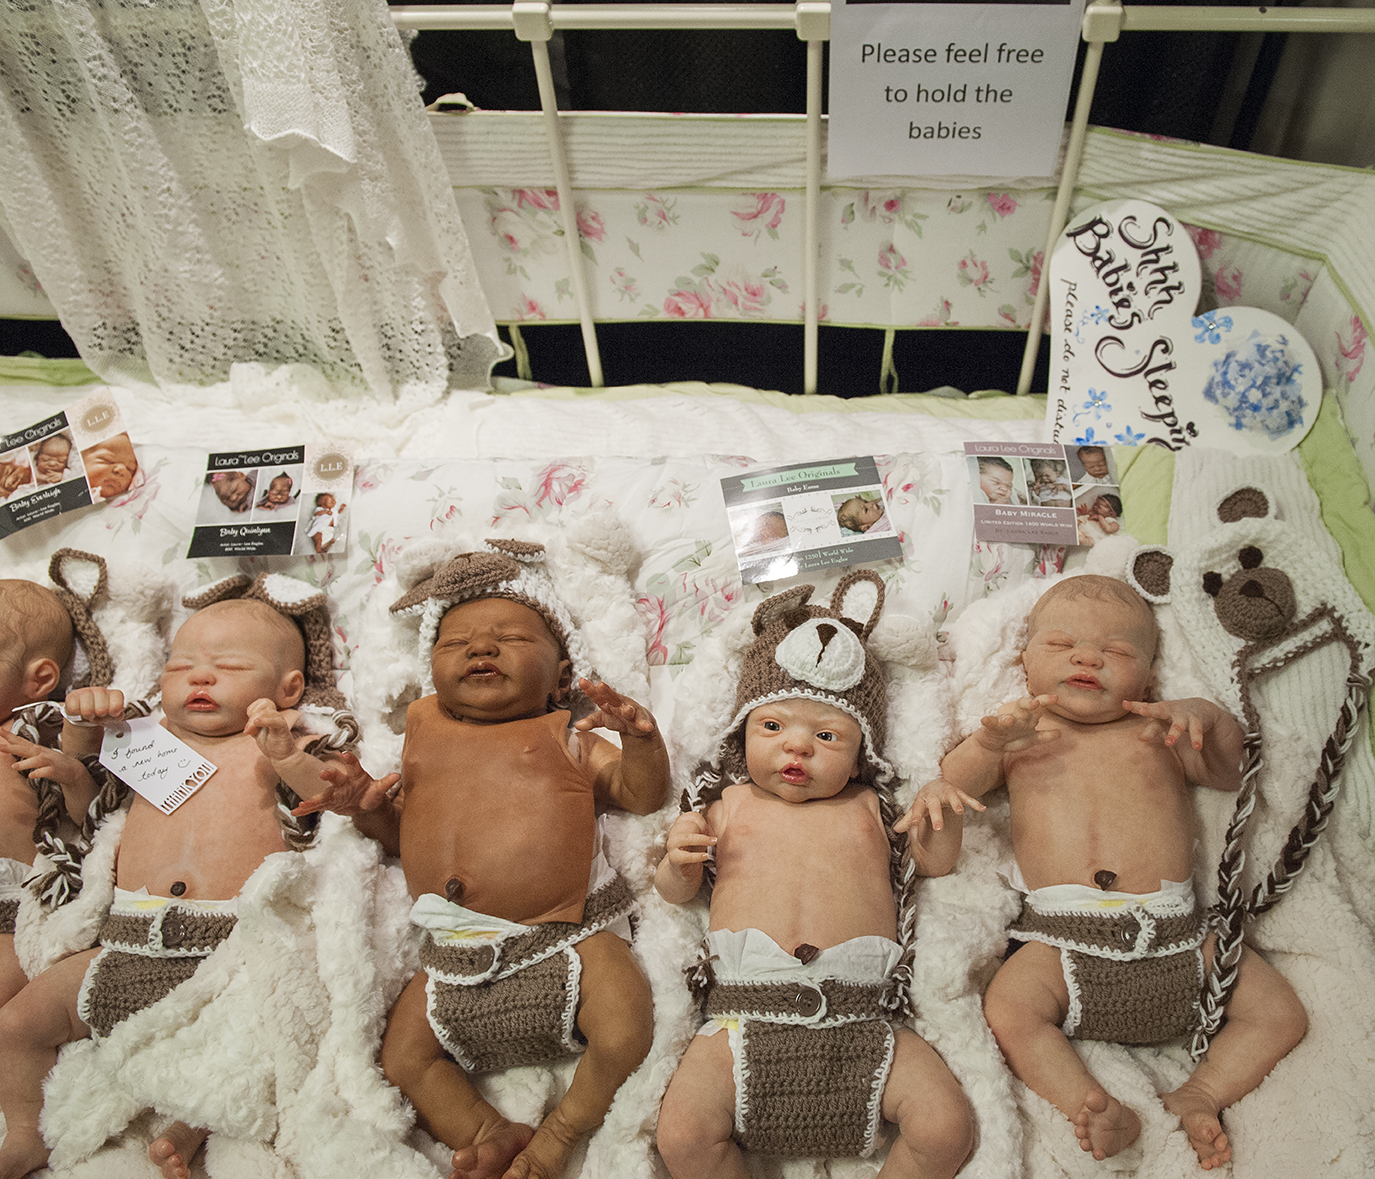  Babies for adoption. There are hundreds of dolls you can choose from at the doll show. These events are very popular in the UK – families, couples and single people come along to look for a perfect "baby". 